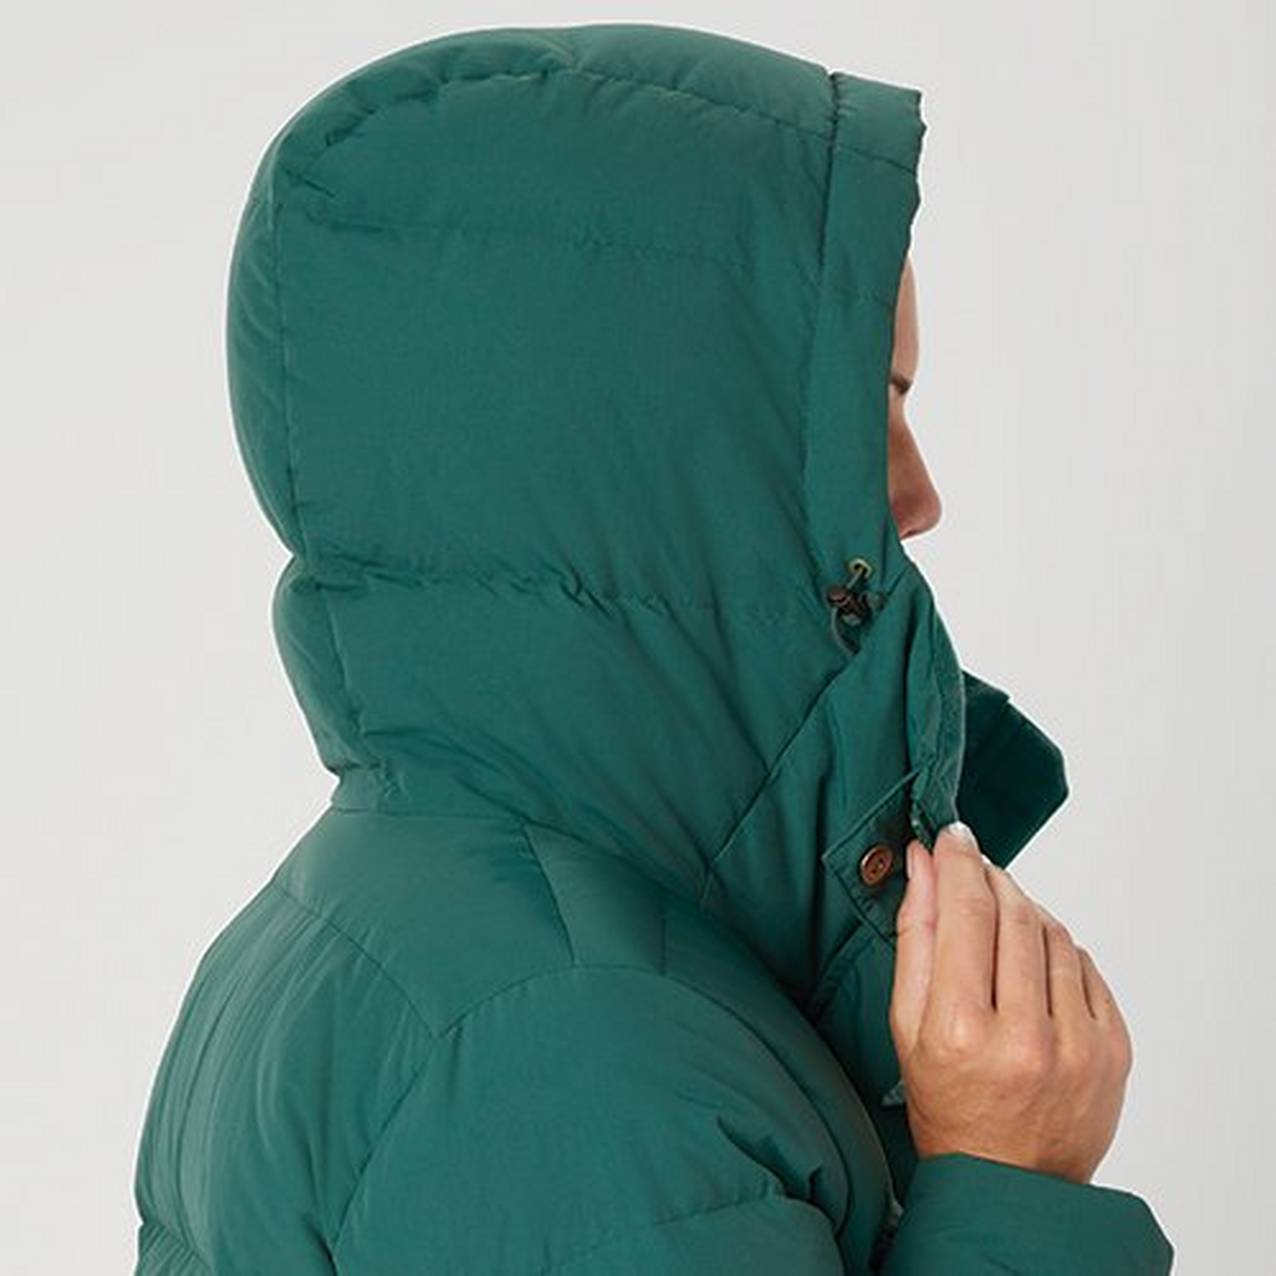 Close up of a woman wearing the hood of a puffy jacket